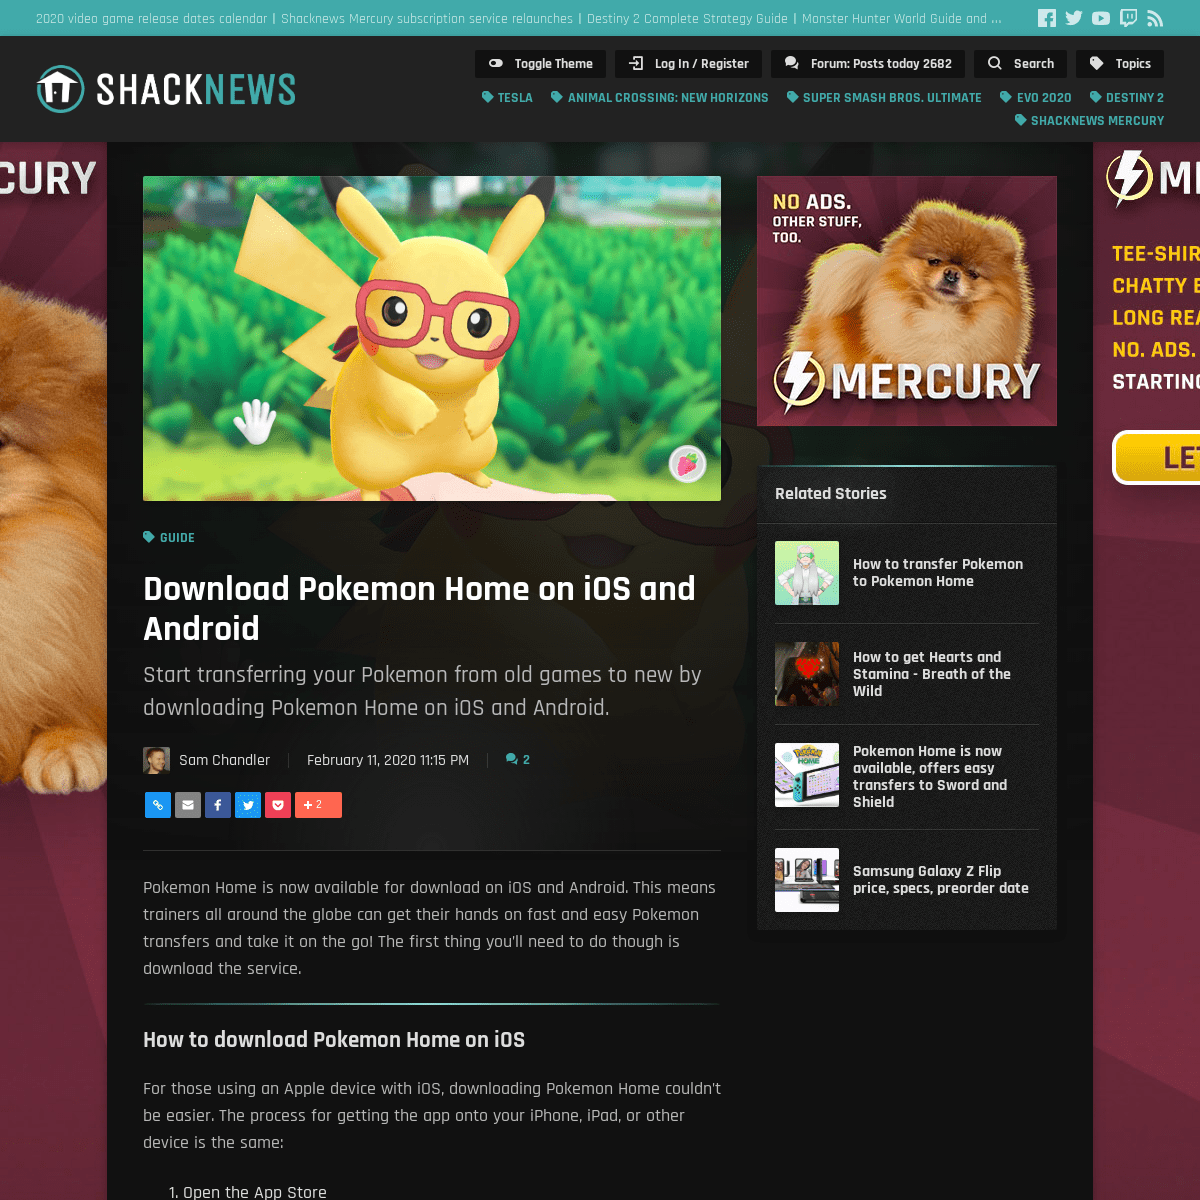 A complete backup of www.shacknews.com/article/116290/download-pokemon-home-on-ios-and-android